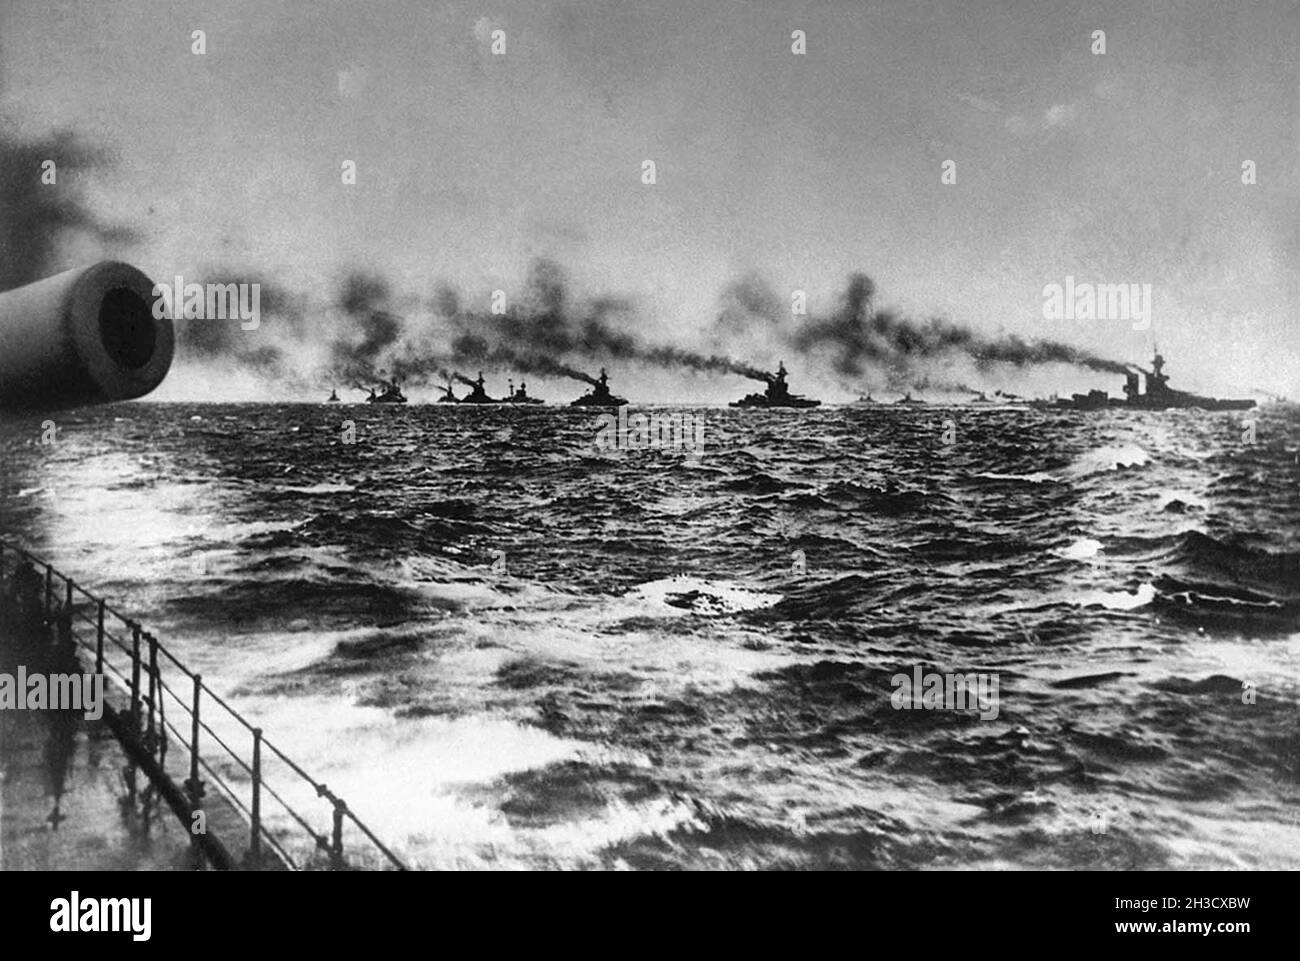 The British Grand Fleet (commanded by admiral John Jellicoe) under way to meet the Imperial German Navy in the Battle of Jutland in the North Sea on May 31, 1916. Stock Photo